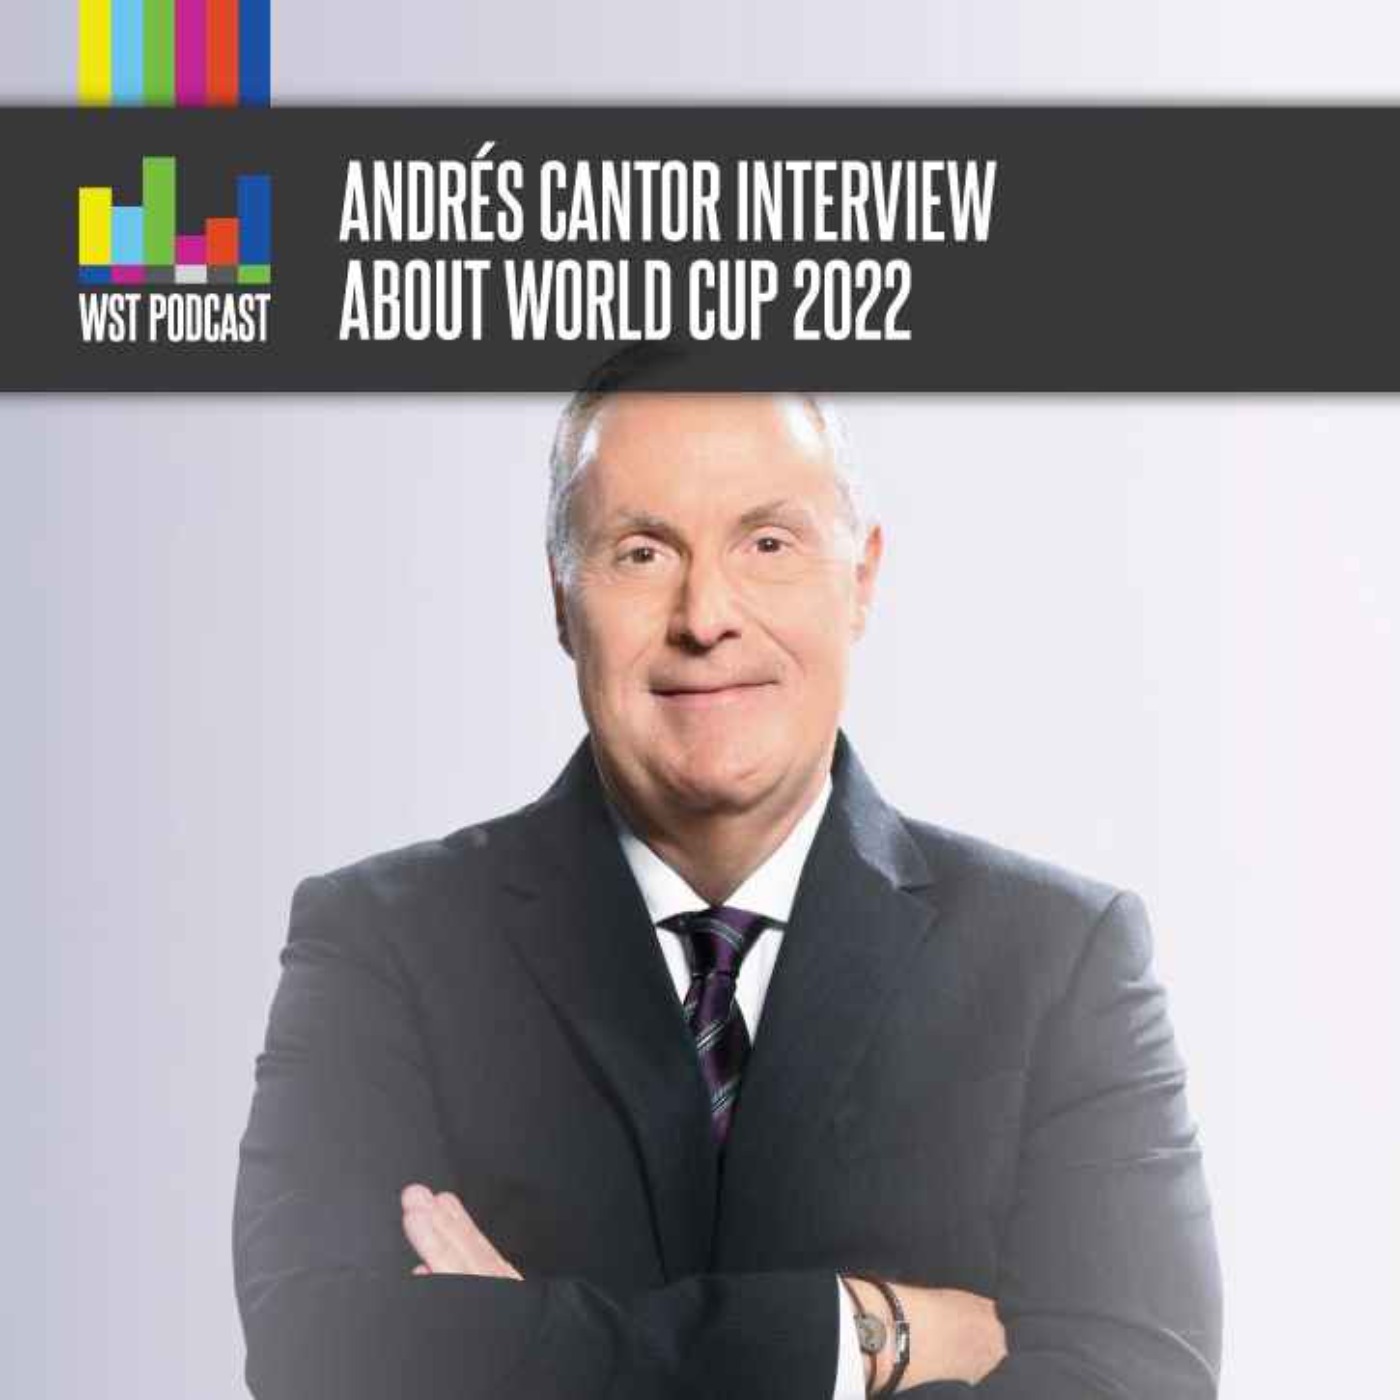 Andrés Cantor interview about World Cup 2022